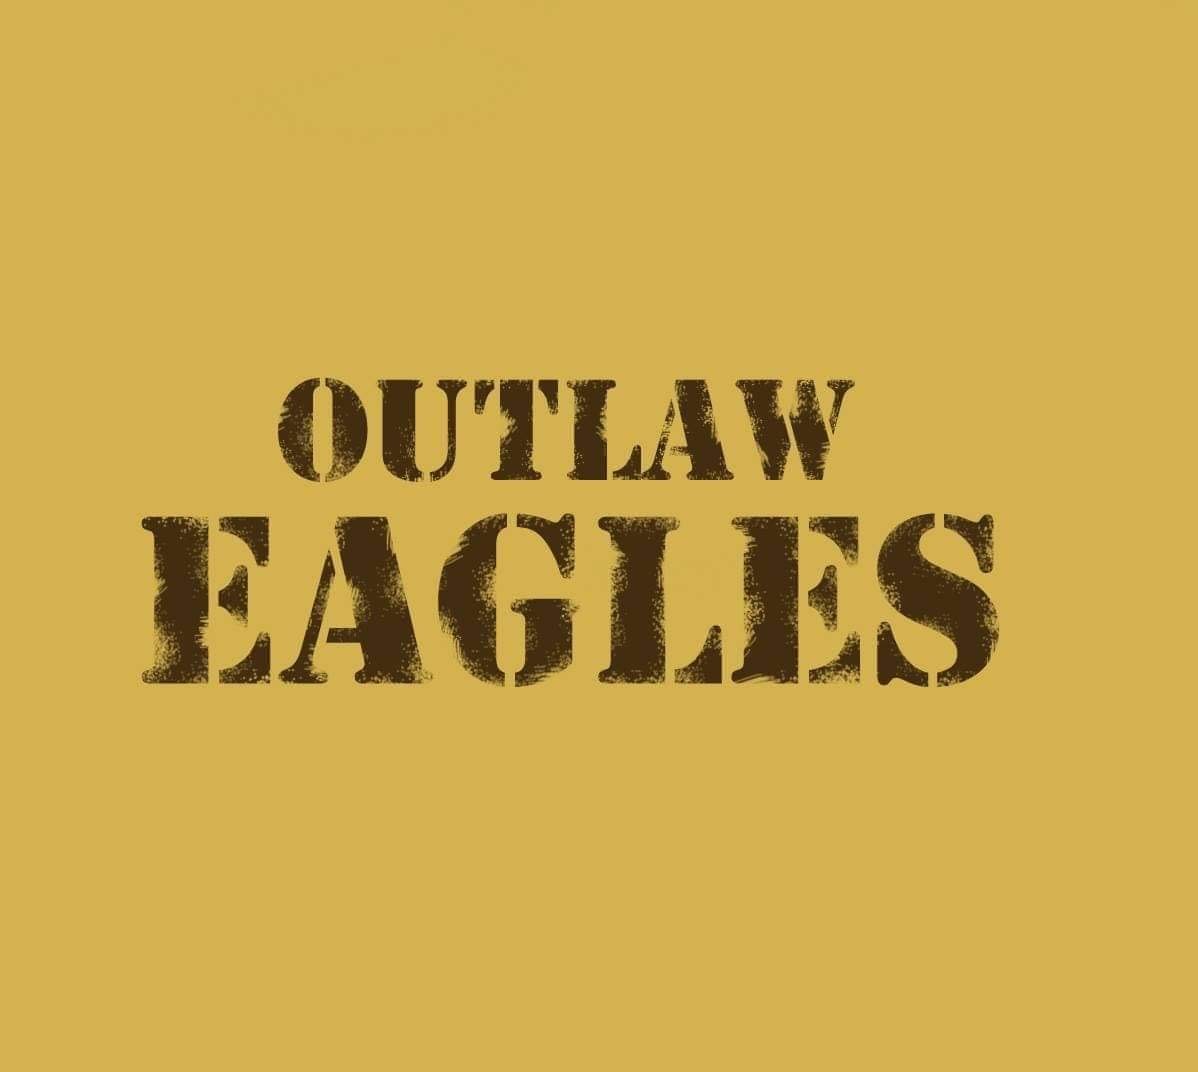 Outlaw Eagles  on Jun 17, 19:30@Wisbech St.Mary Community Centre - Buy tickets and Get information on whittlesey music nights 